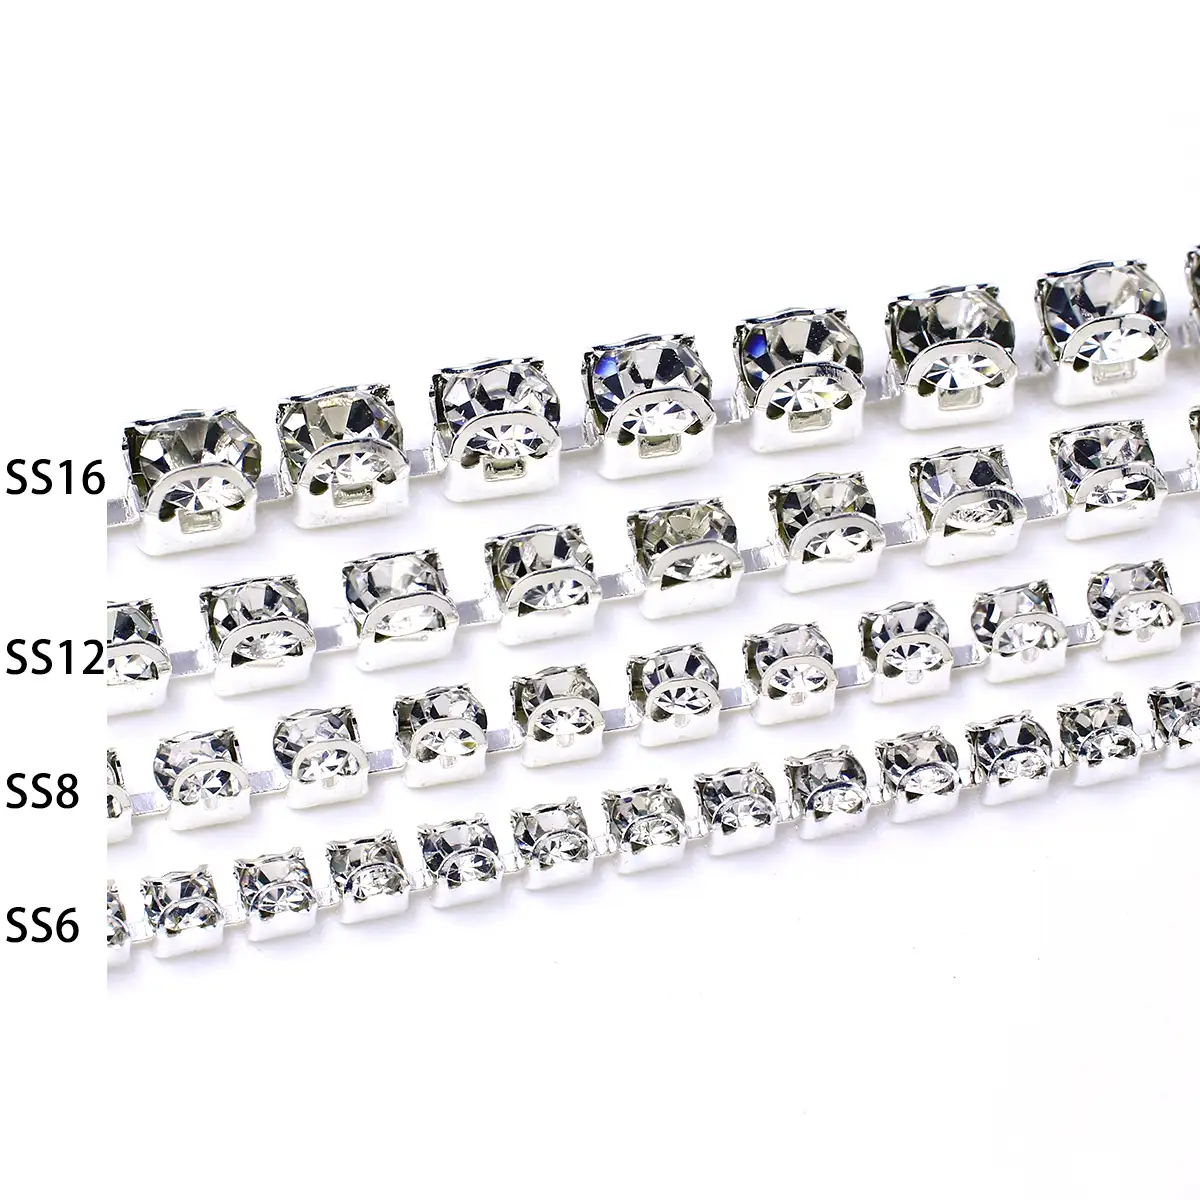 Topa AAA grade kristall trimmen messing D form Square basis 2.5 MM SS8 Crystal Rhinestone cupchian für kleidung